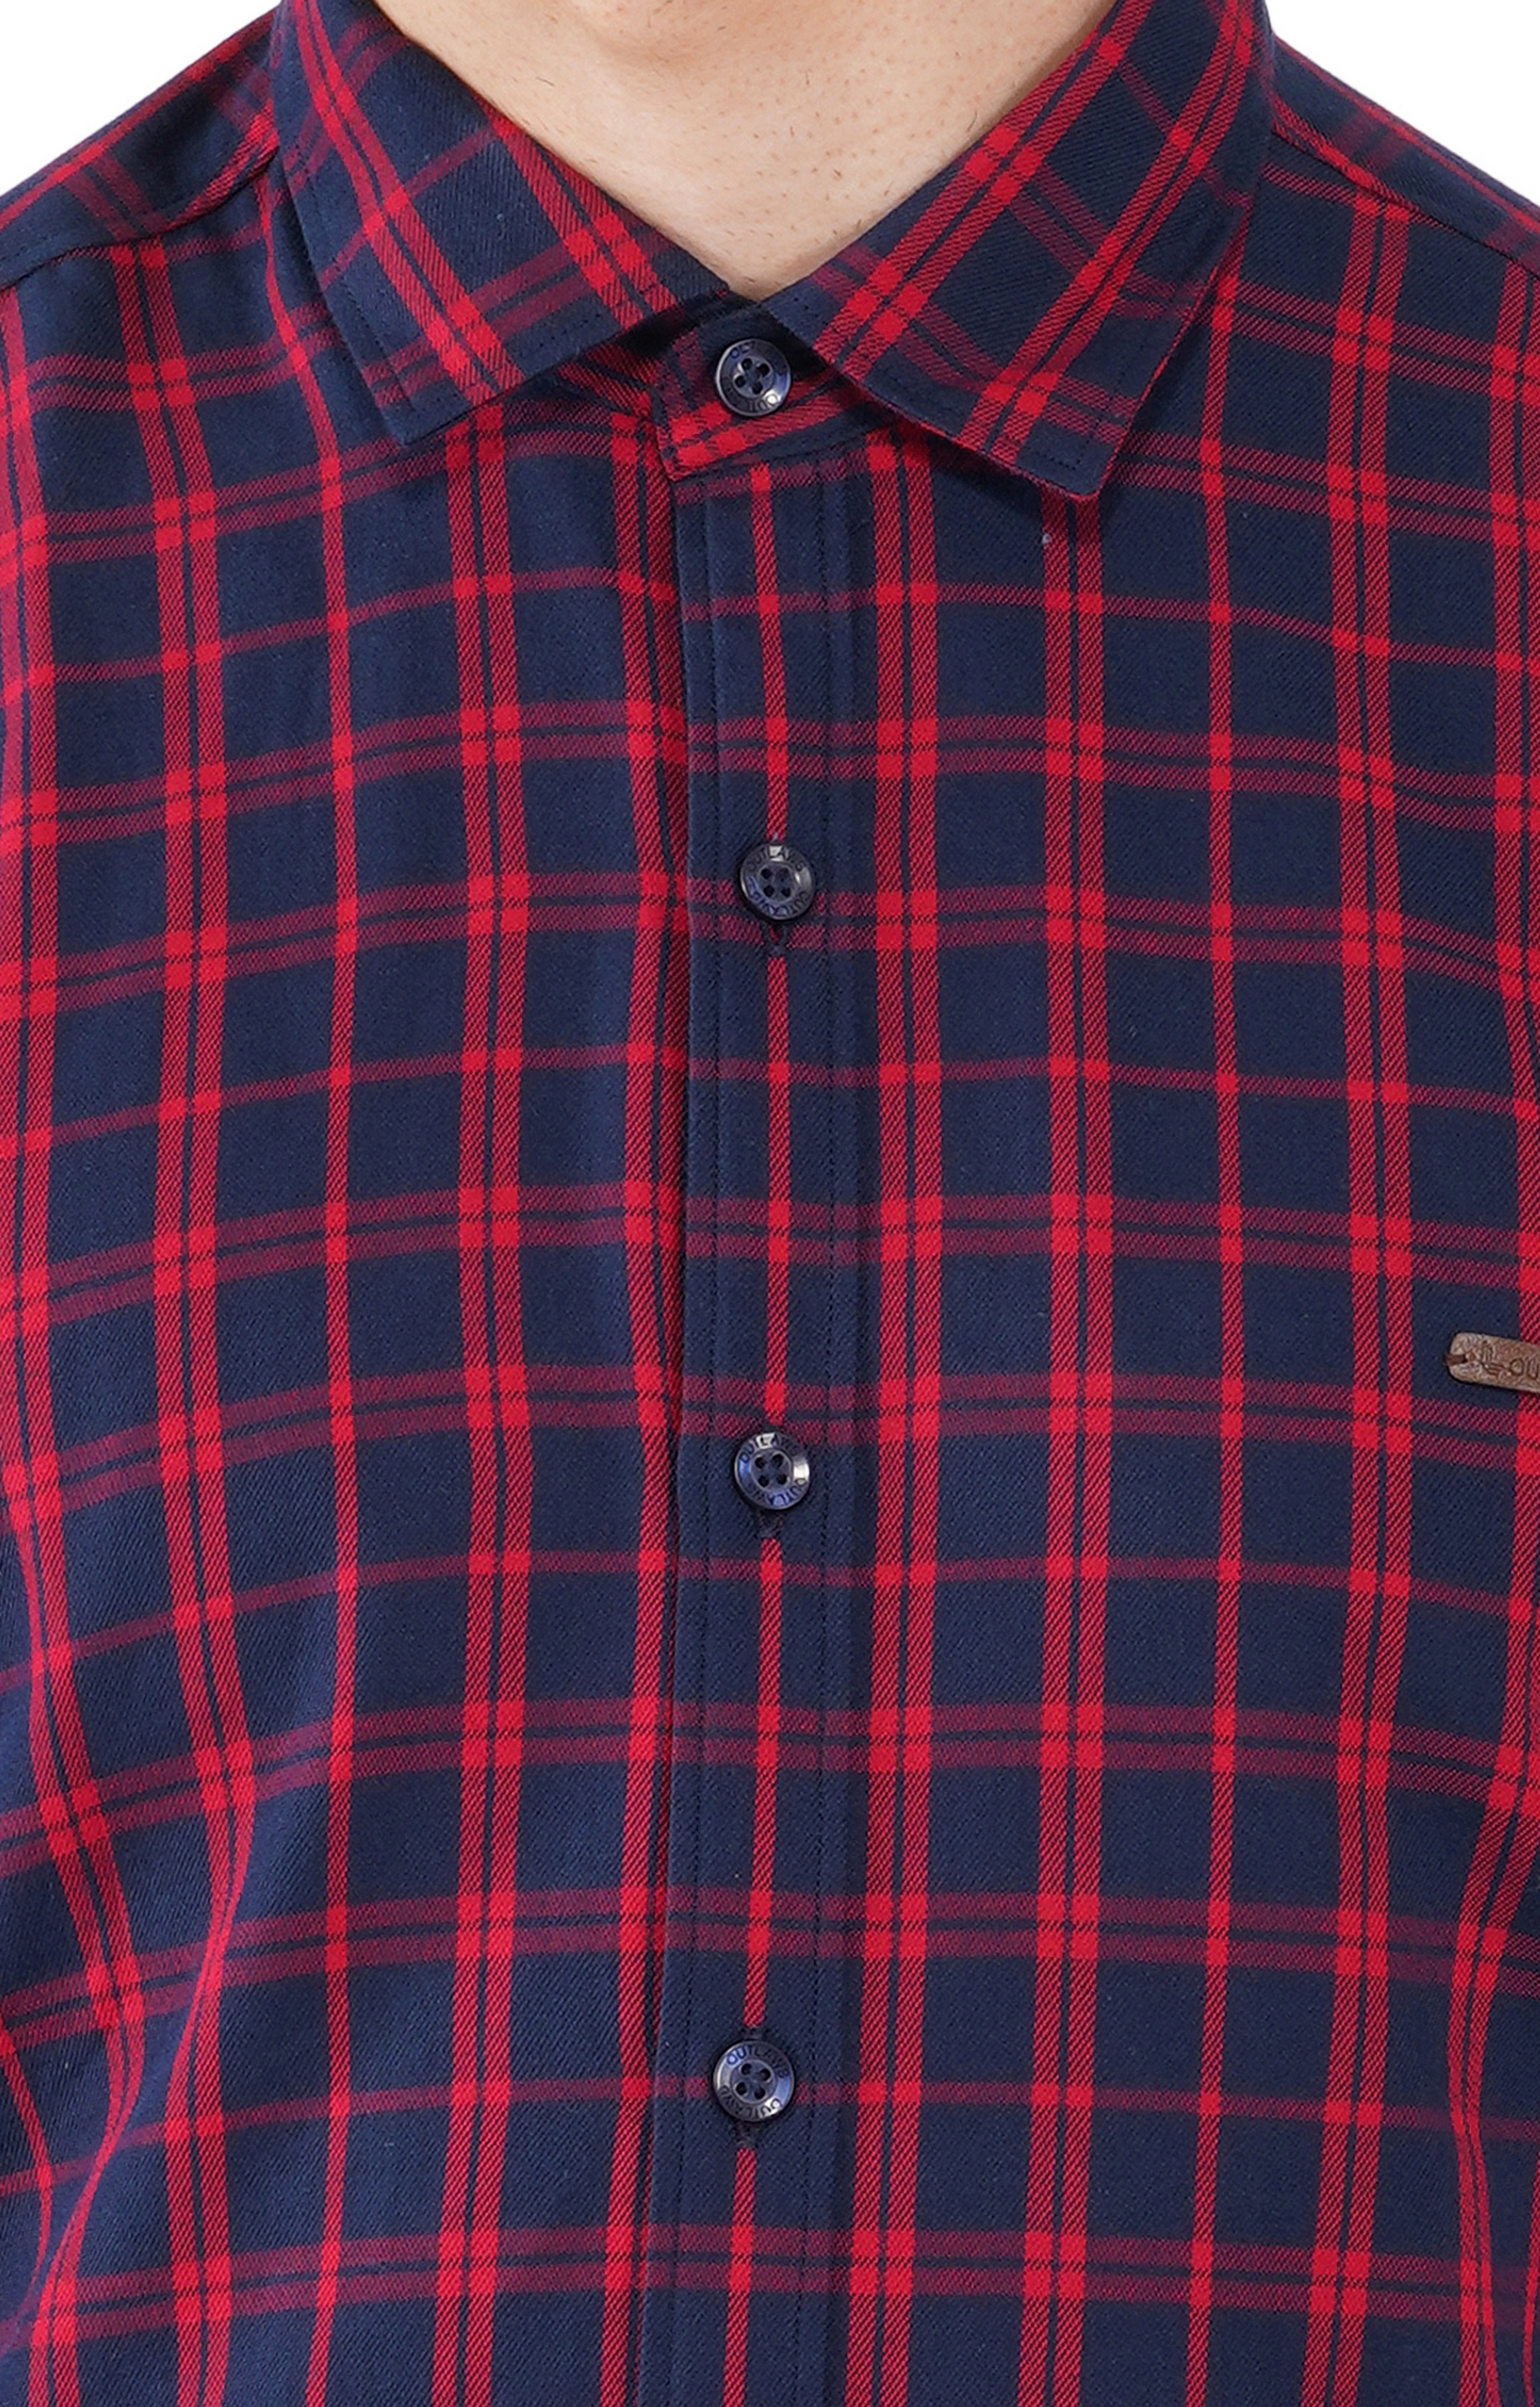 OUTLAWS | Outlaws 7041 - 100% Cotton Multi Color Check Smart Fit Shirt 6